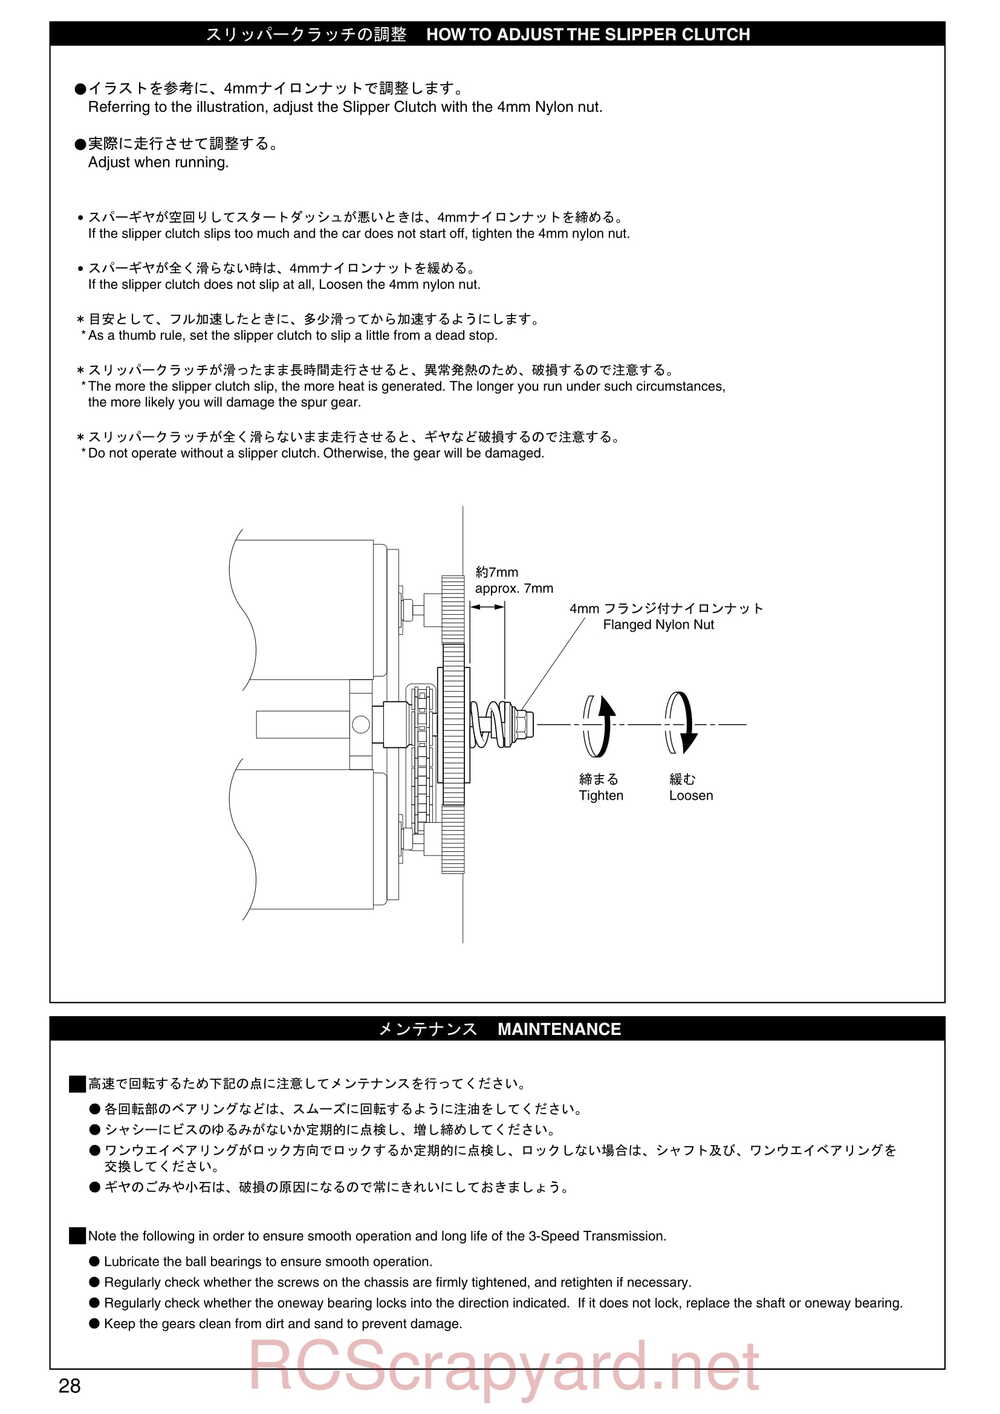 Kyosho - 30522b - Twin-Forcec-SP - Manual - Page 28